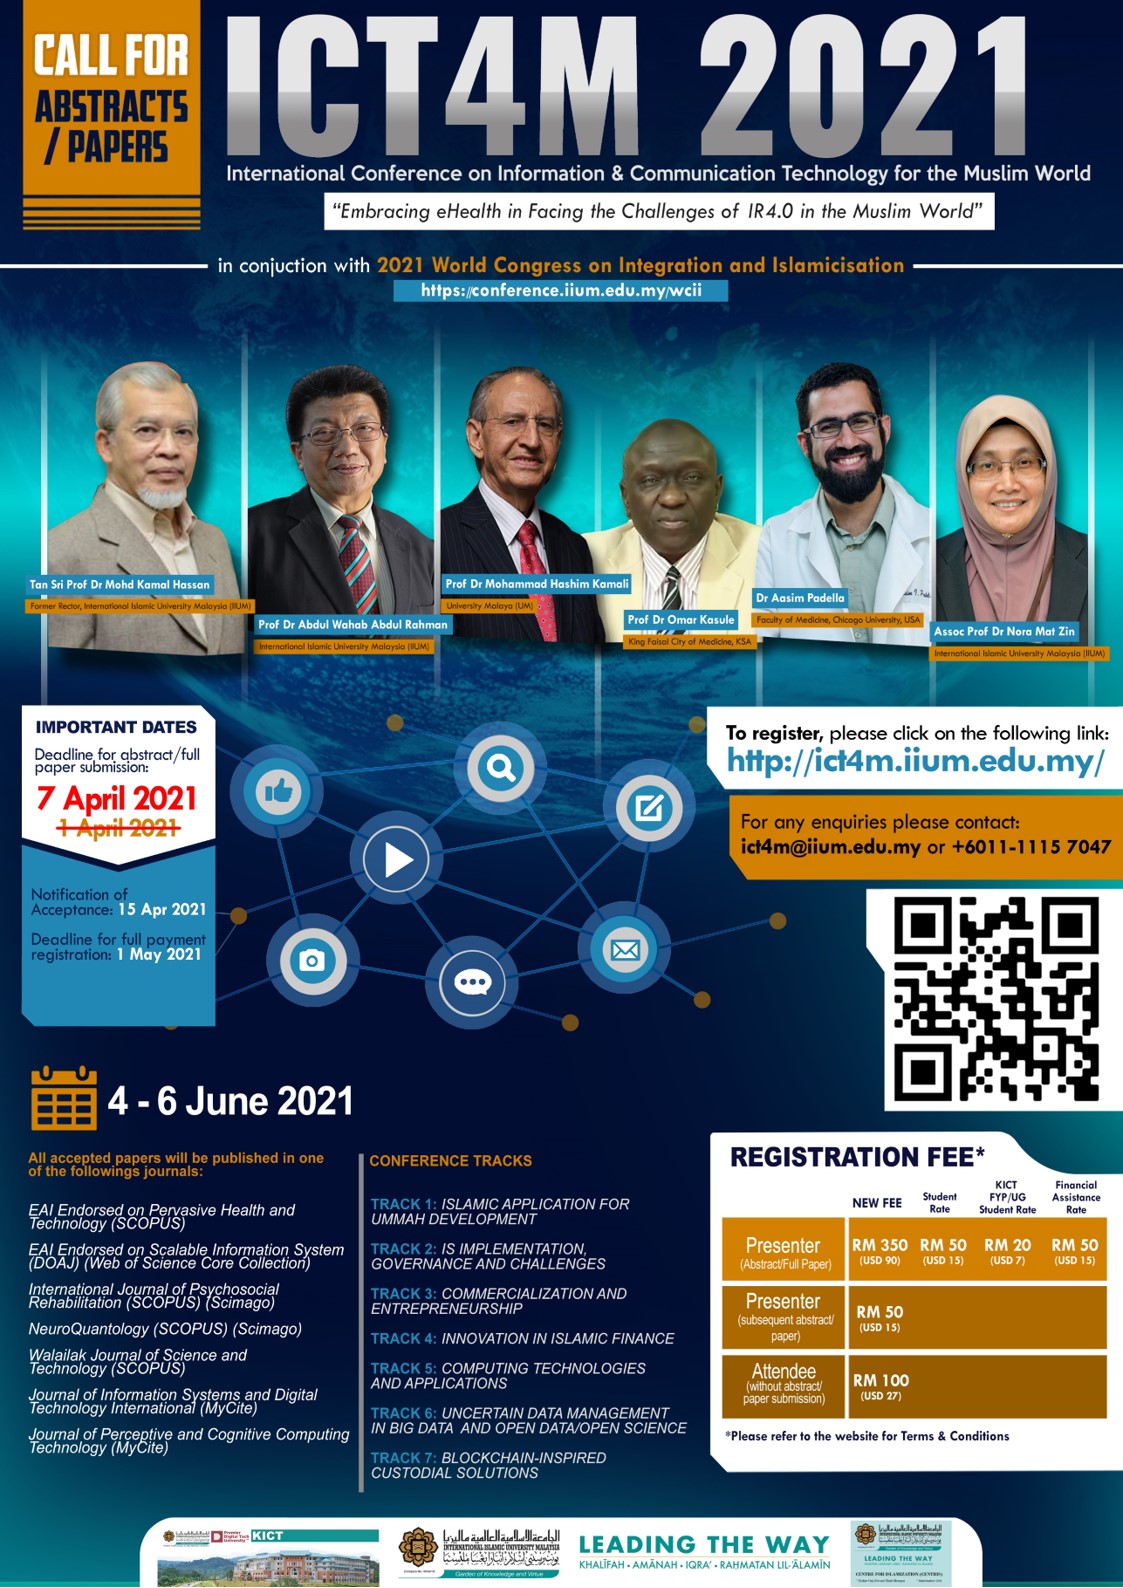 ICT4M 2021 - The 8th International Conference on Information & Communication Technology for the Muslim World